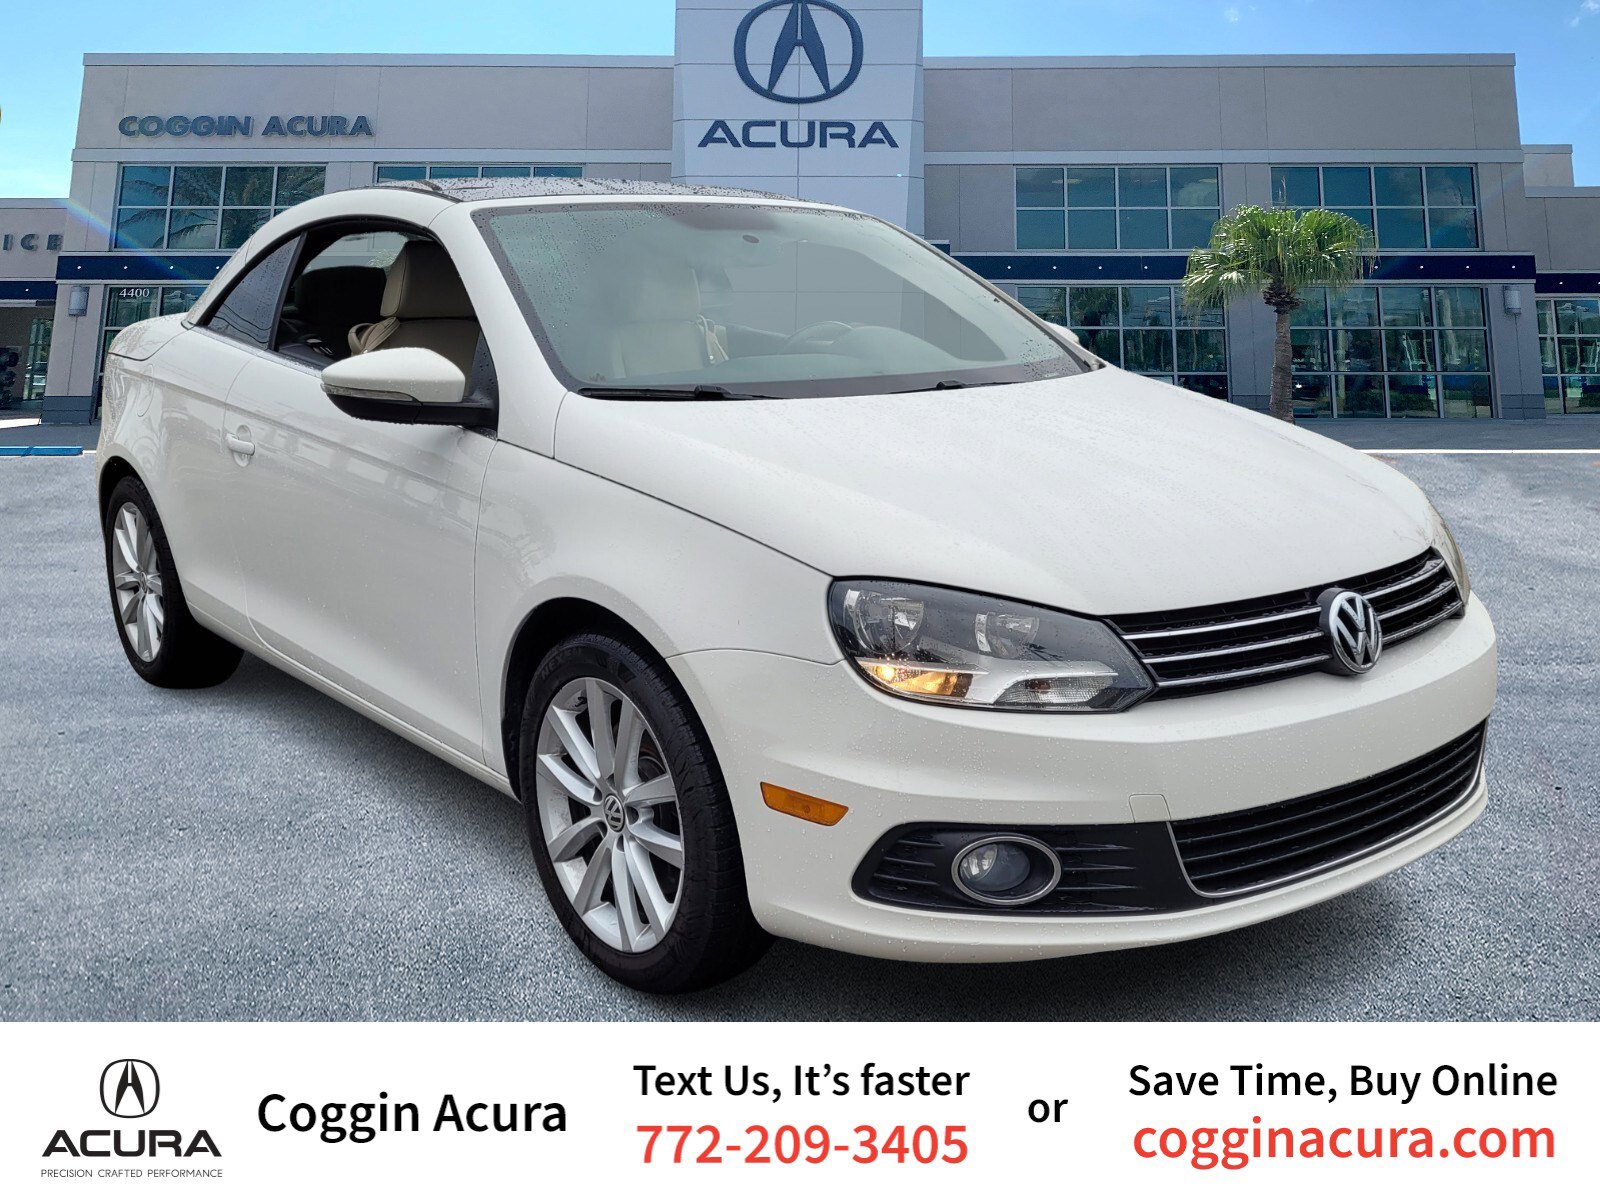 Used Volkswagen cars for sale or on finance - cinch